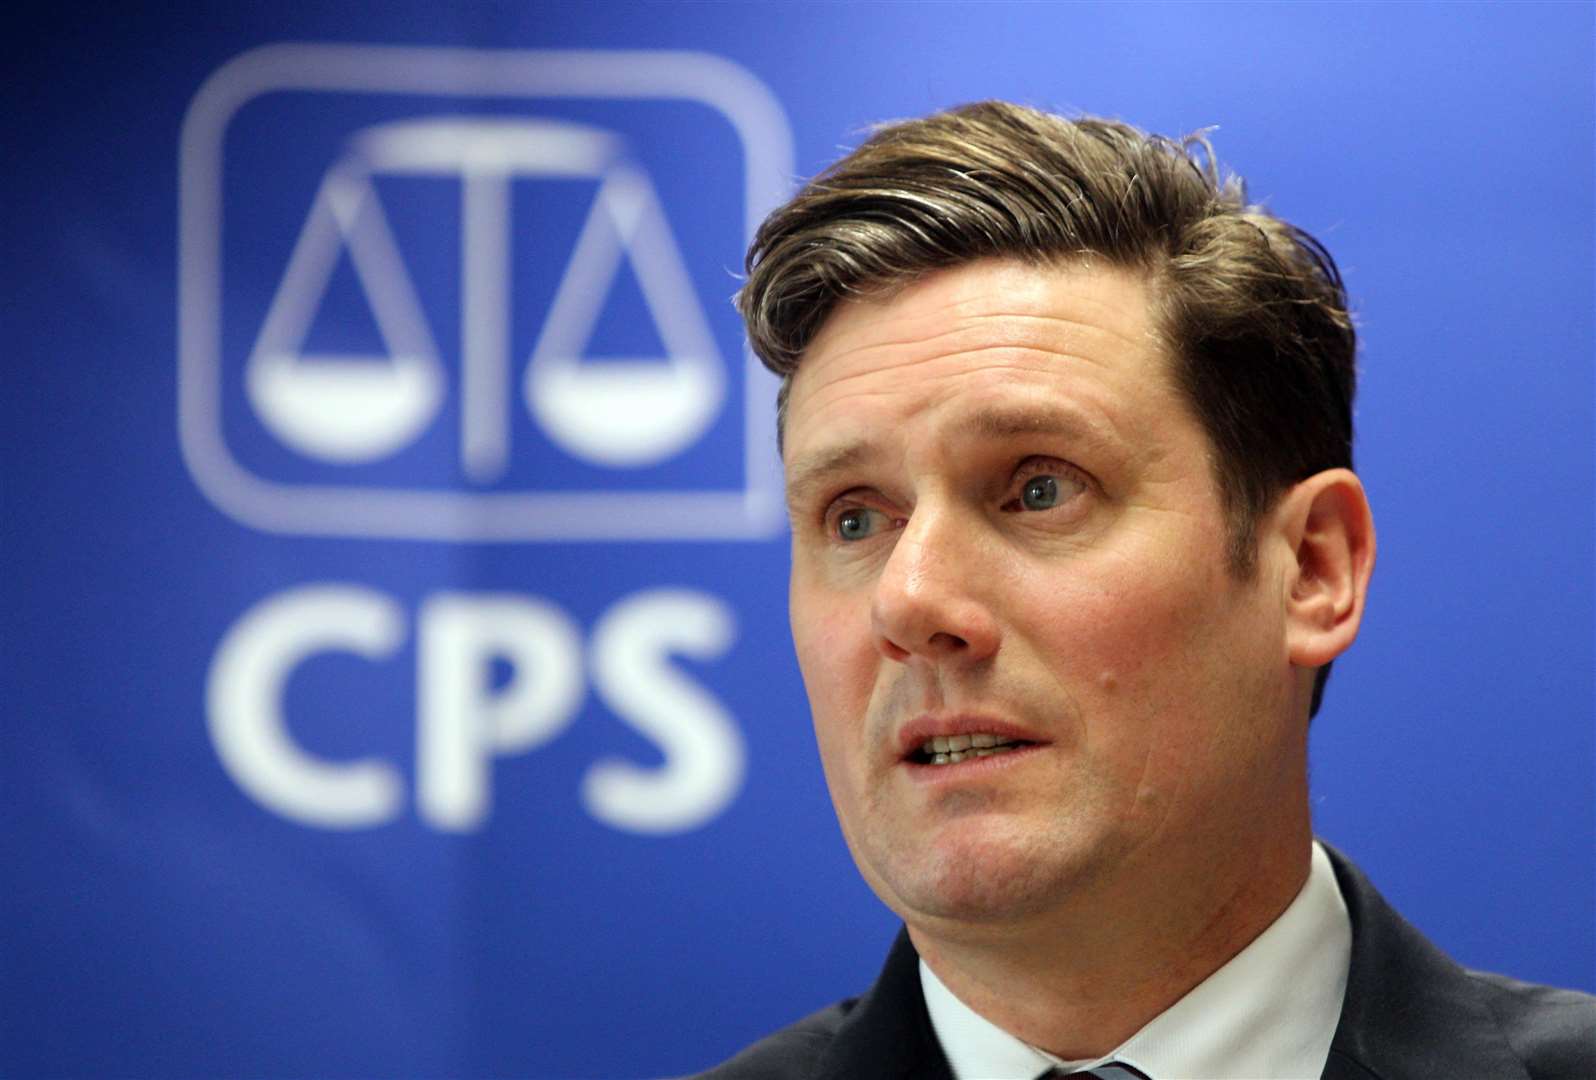 Sir Keir Starmer during his time as director of public prosecutions (Lewis Whyld/PA)